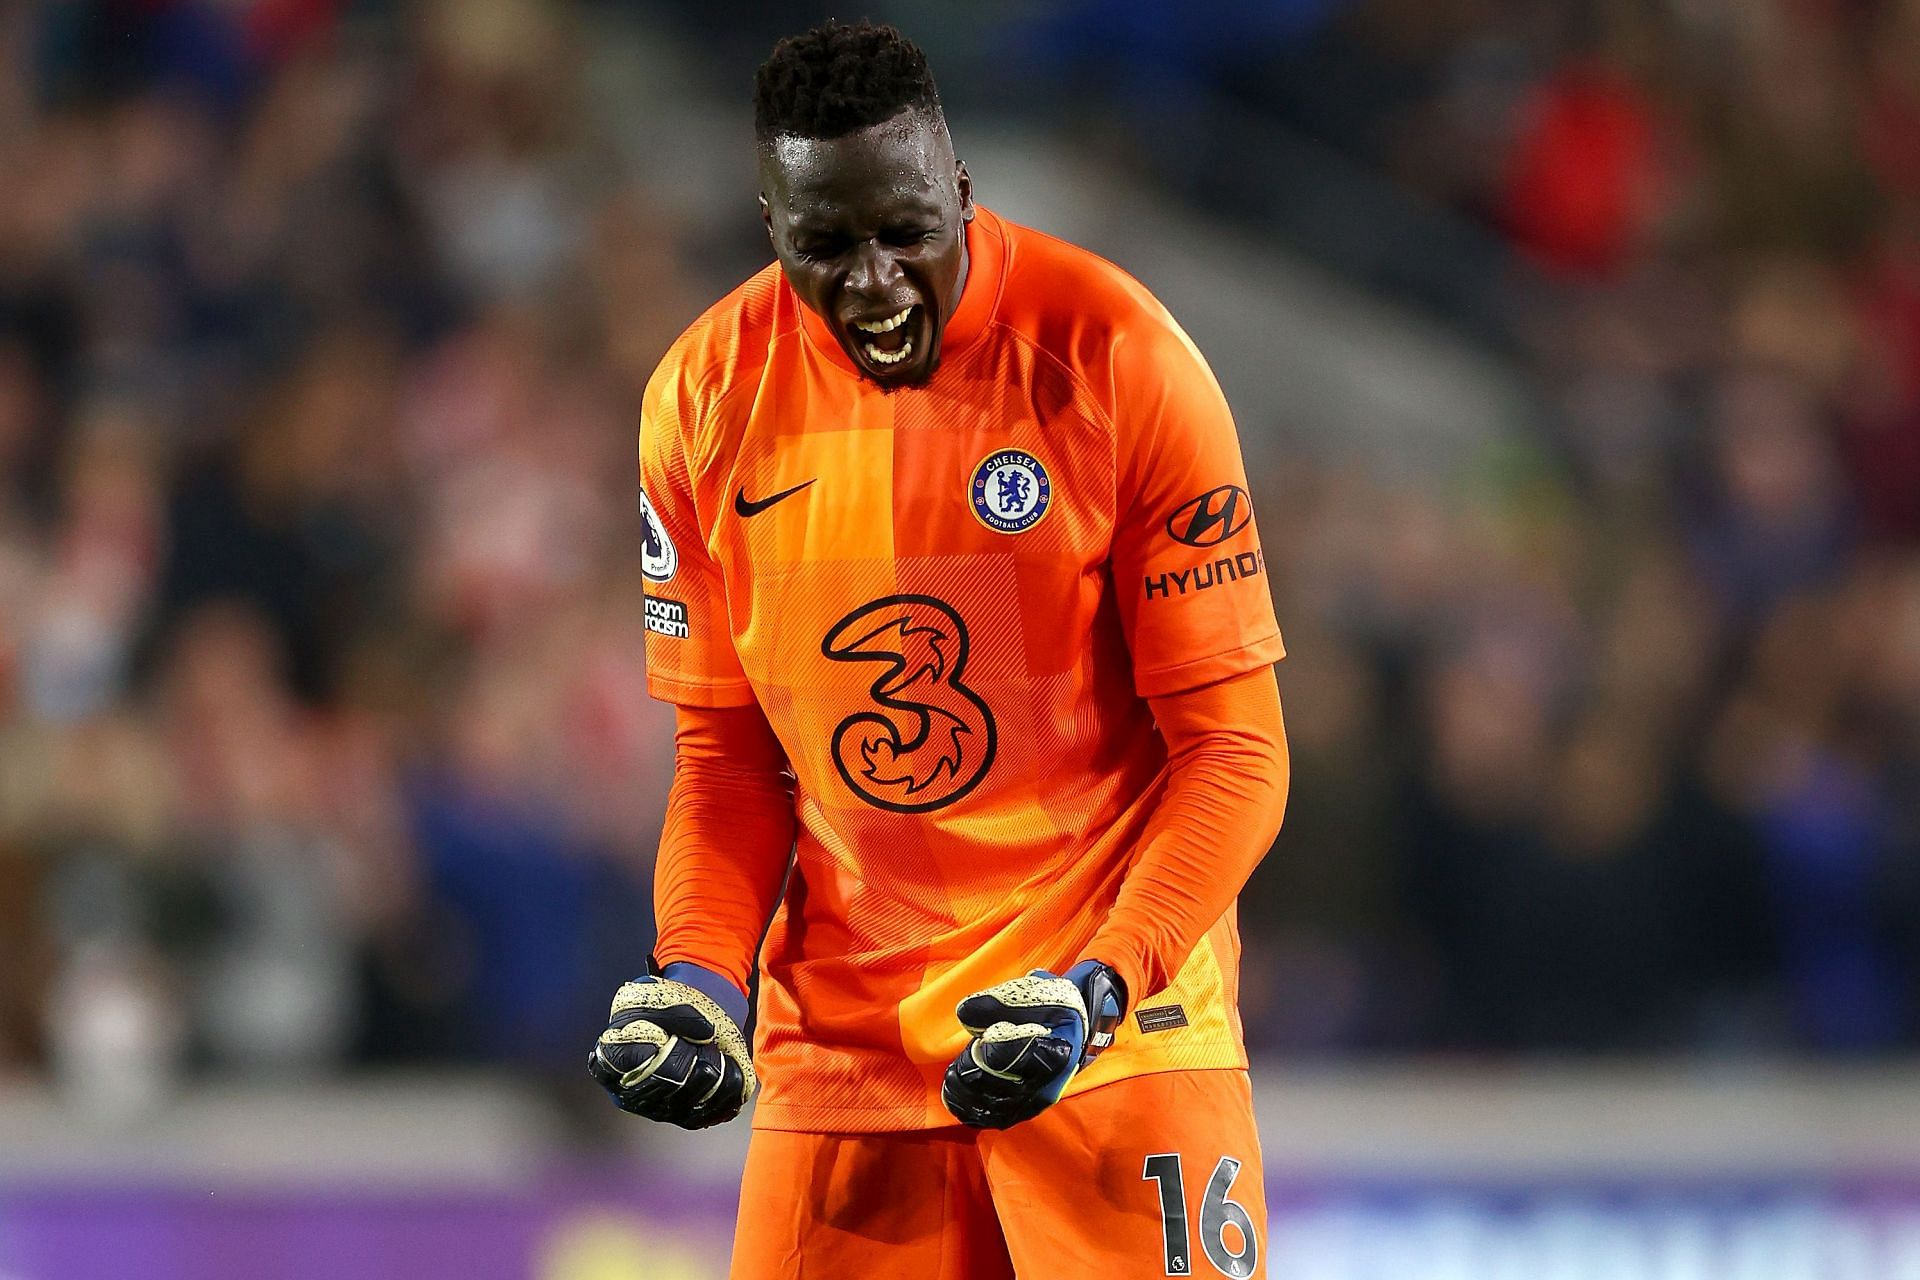 Chelsea goalkeeper Edouard Mendy has been on top of his game since joining the club.